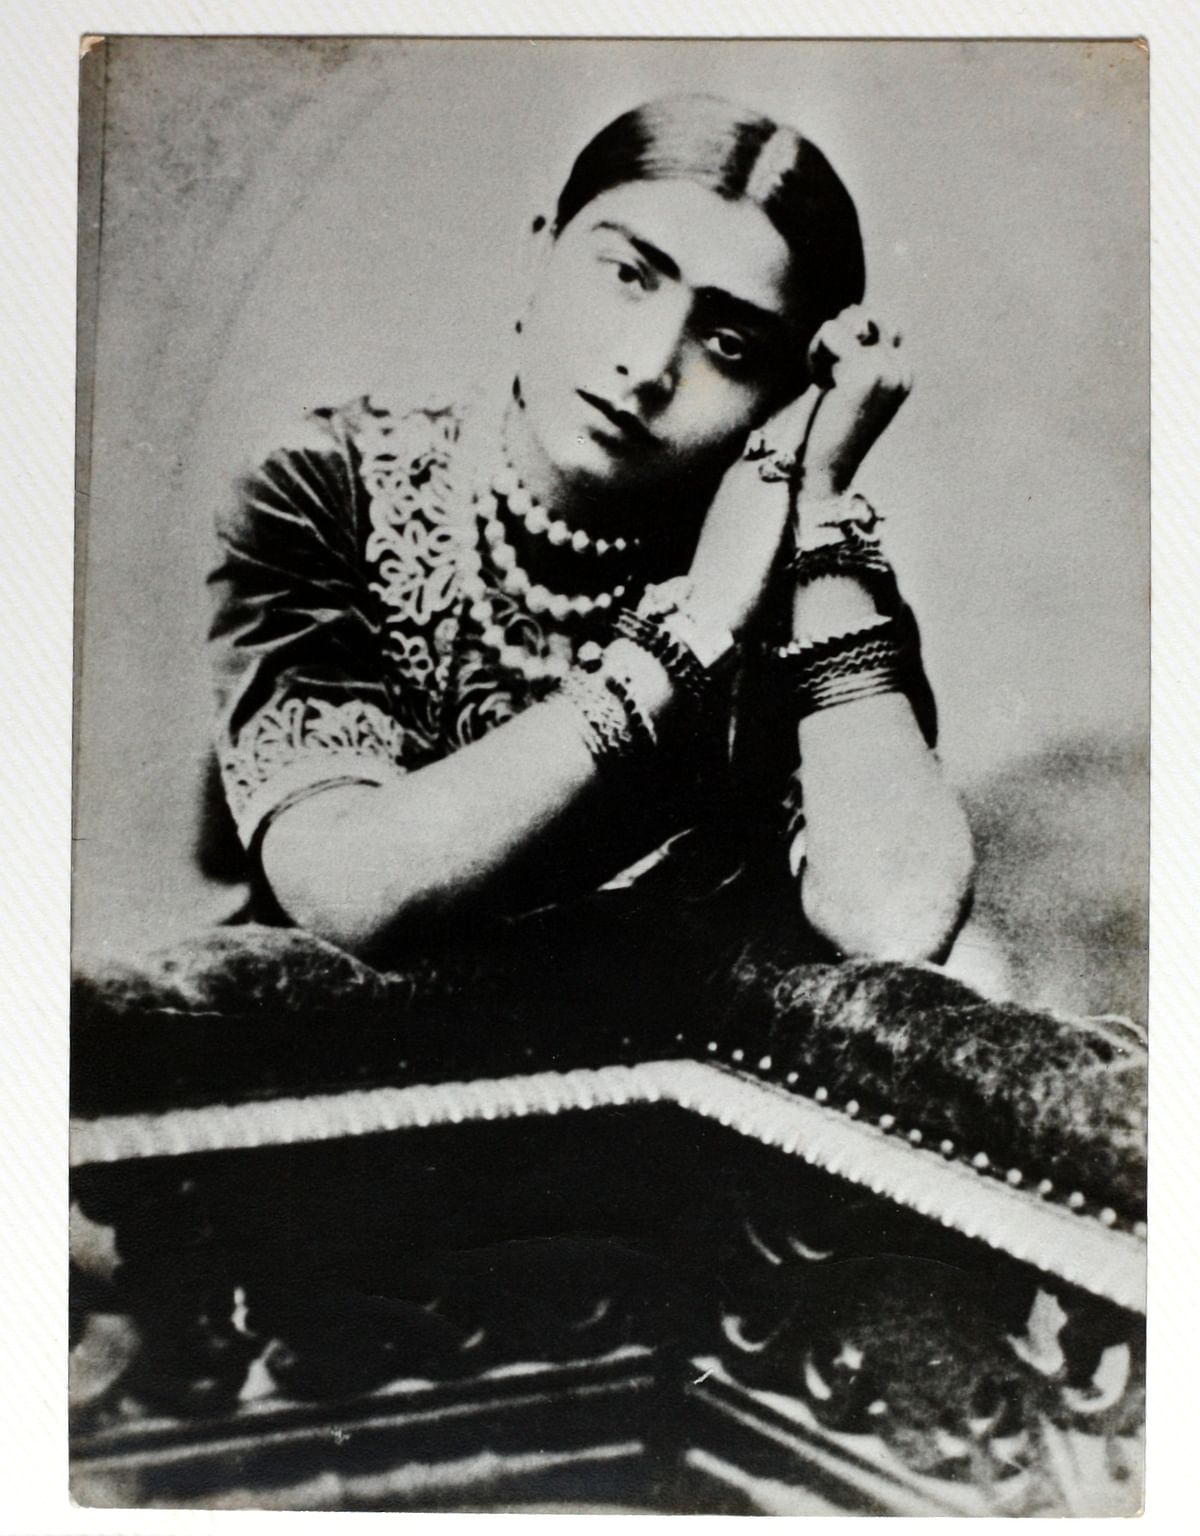 Women musicians of the 20th century tried the gramophone at a time when men of India showed resistance.